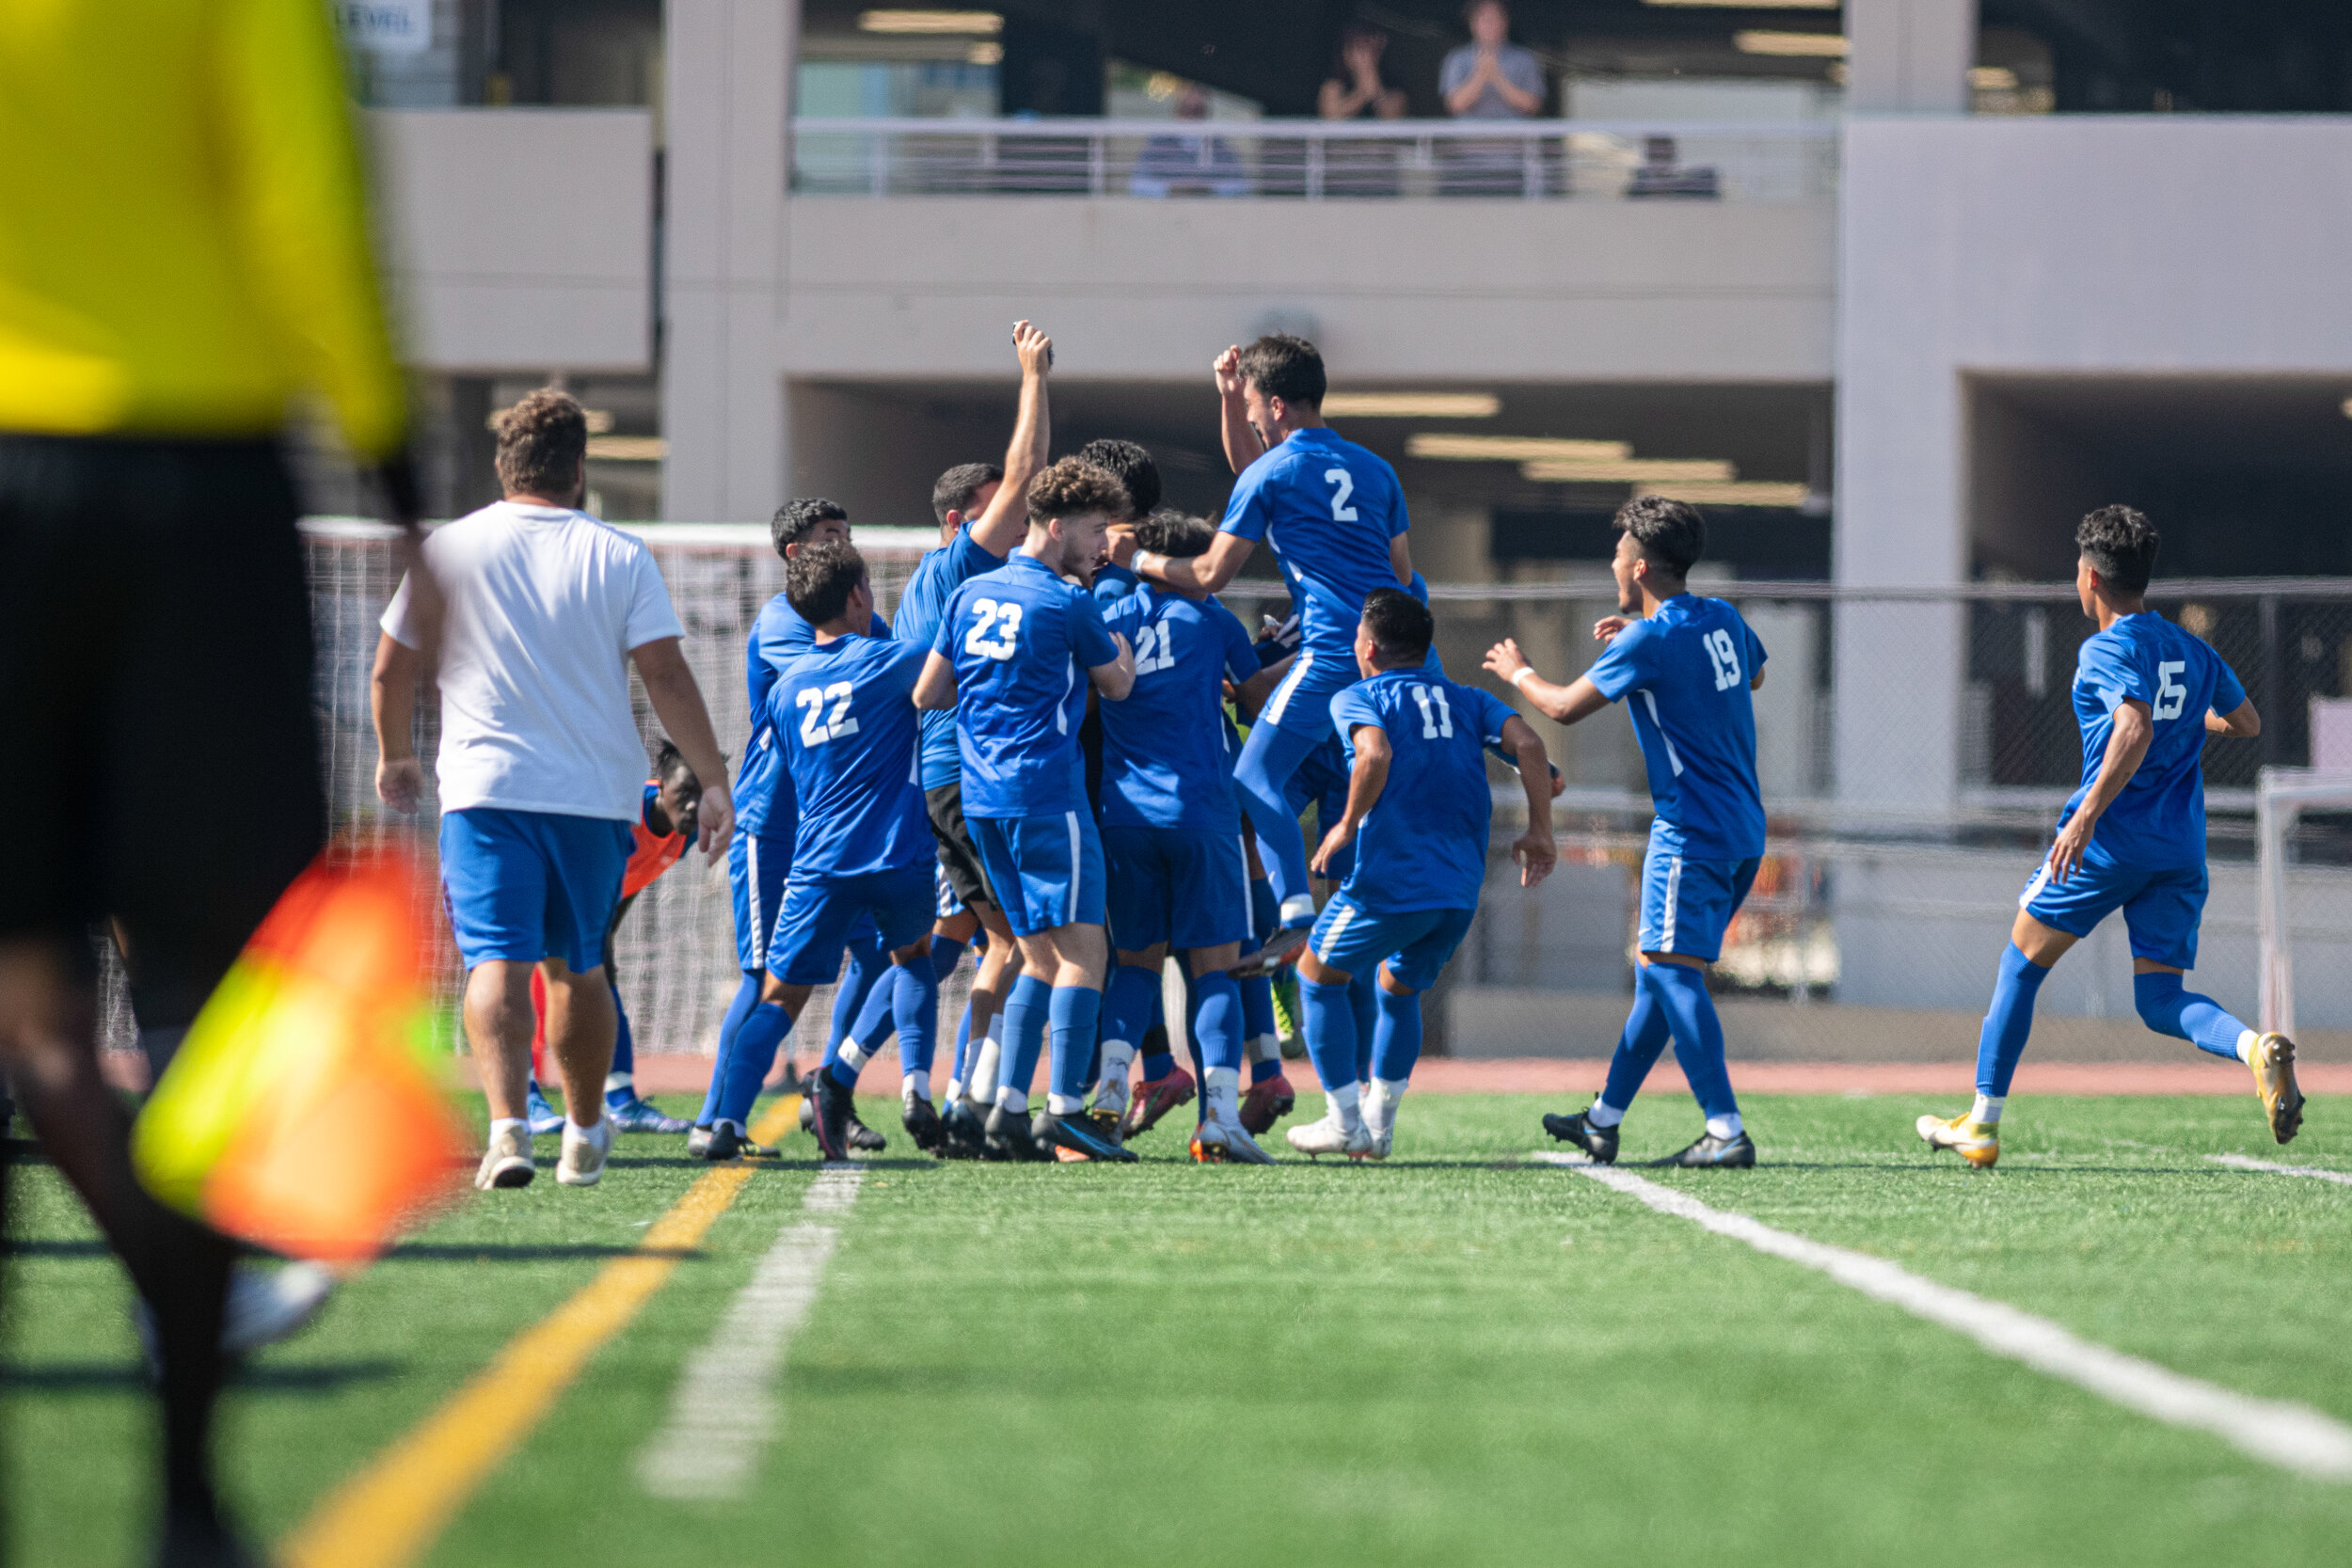  Santa Monica College Mens Soccer Team celebrates after scoring their second goal, which would ultimately give them their 2-1 victory over Norco College, on September 14, 2021, at Santa Monica College in Santa Monica, Calif. (Jon Putman | The Corsair